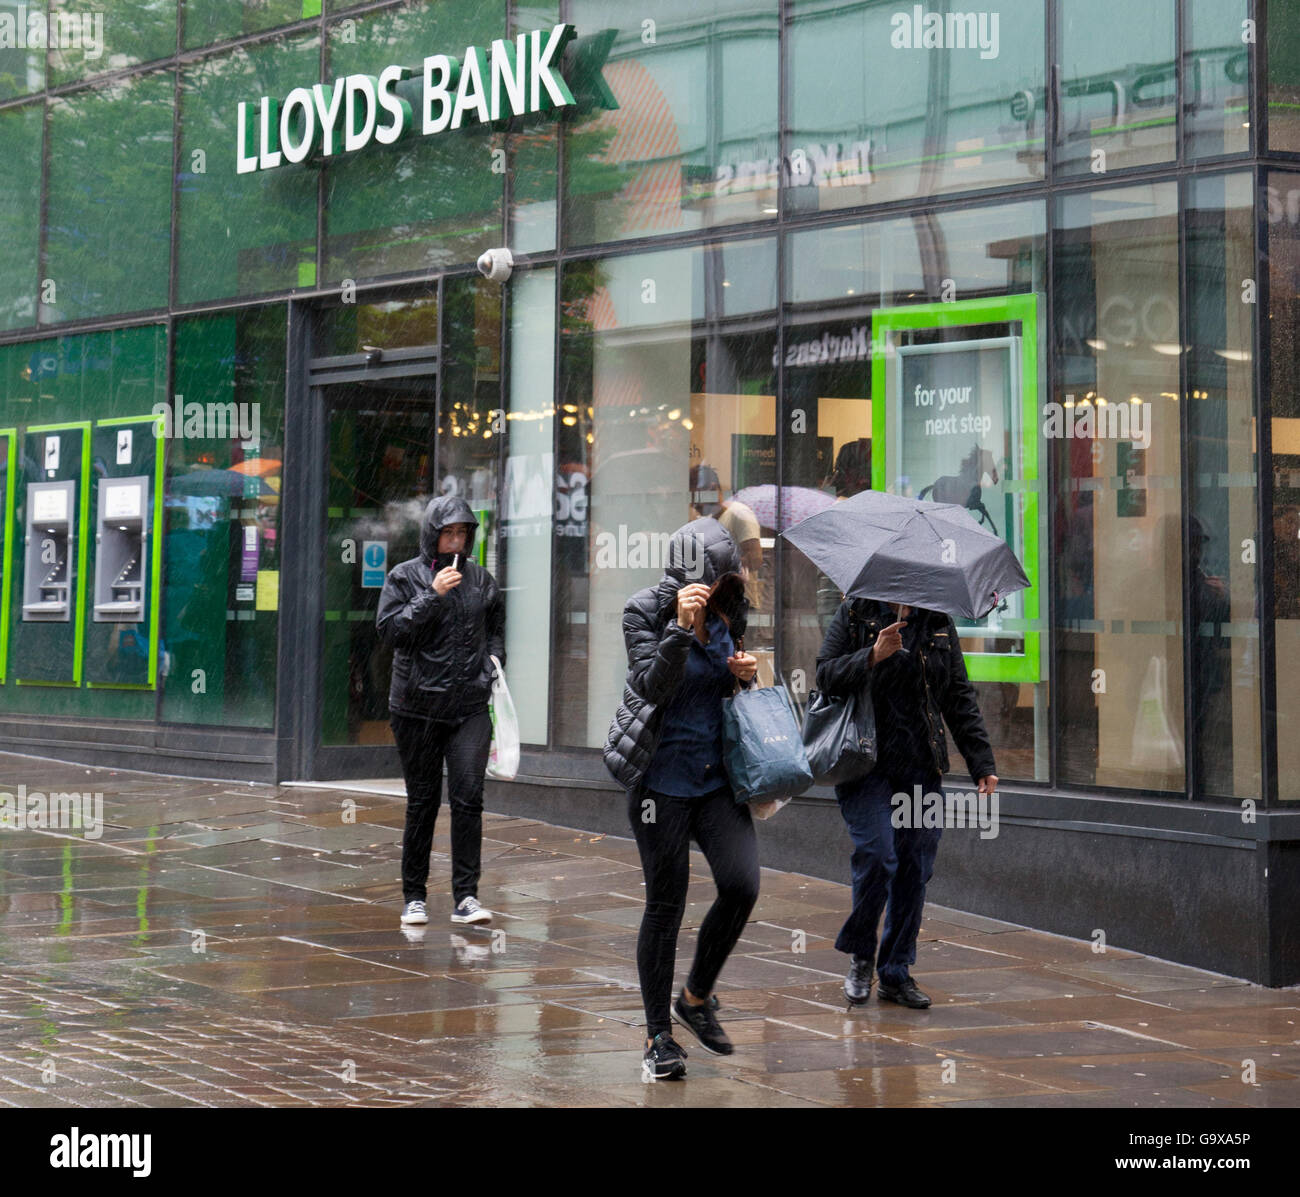 Lloyds Bank in  Market street, Manchester, Piccadilly, UK Stock Photo